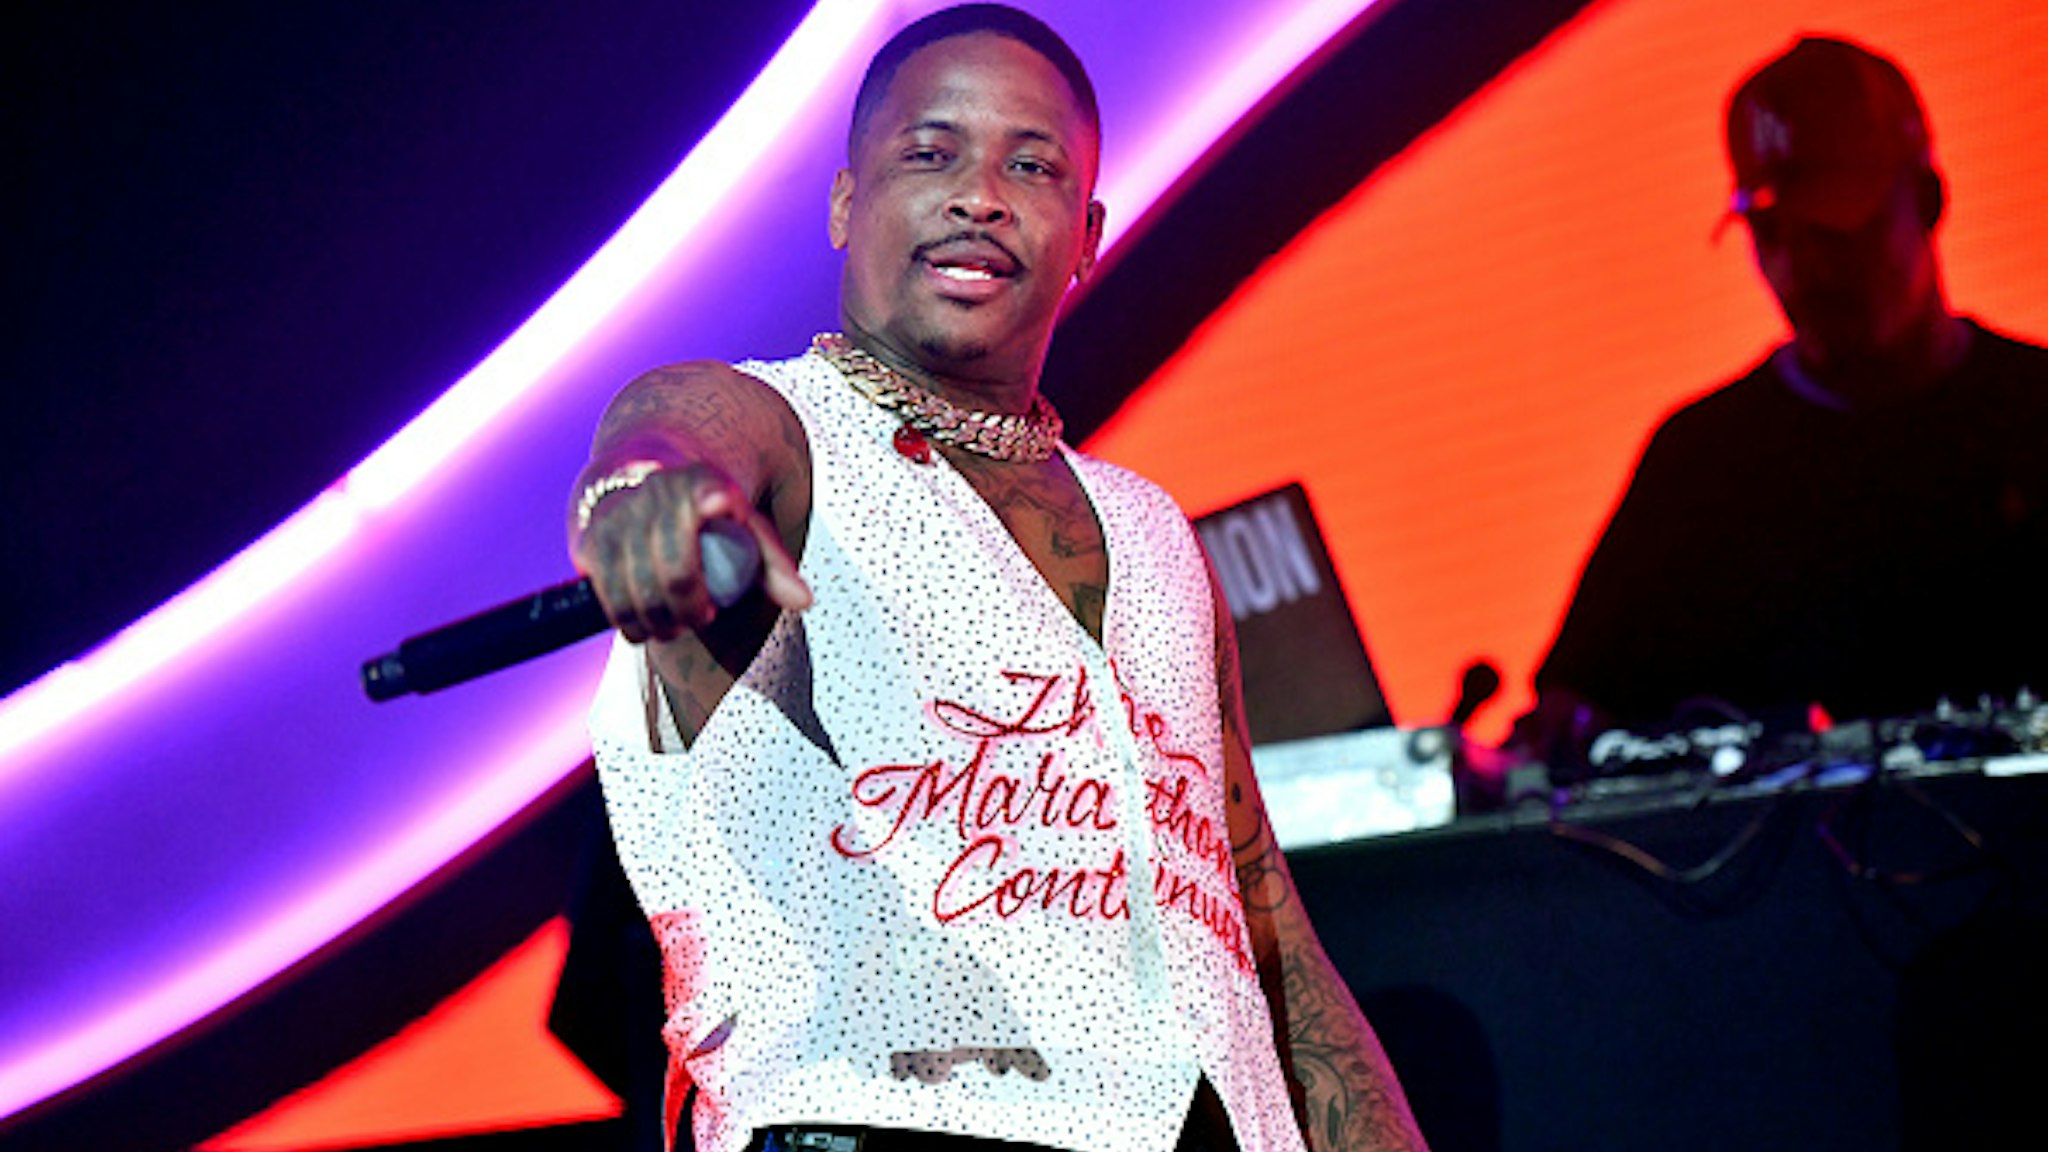 LOS ANGELES, CALIFORNIA - JUNE 21: Rapper YG performs onstage during the 7th Annual BET Experience at Staples Center on June 21, 2019 in Los Angeles, California.